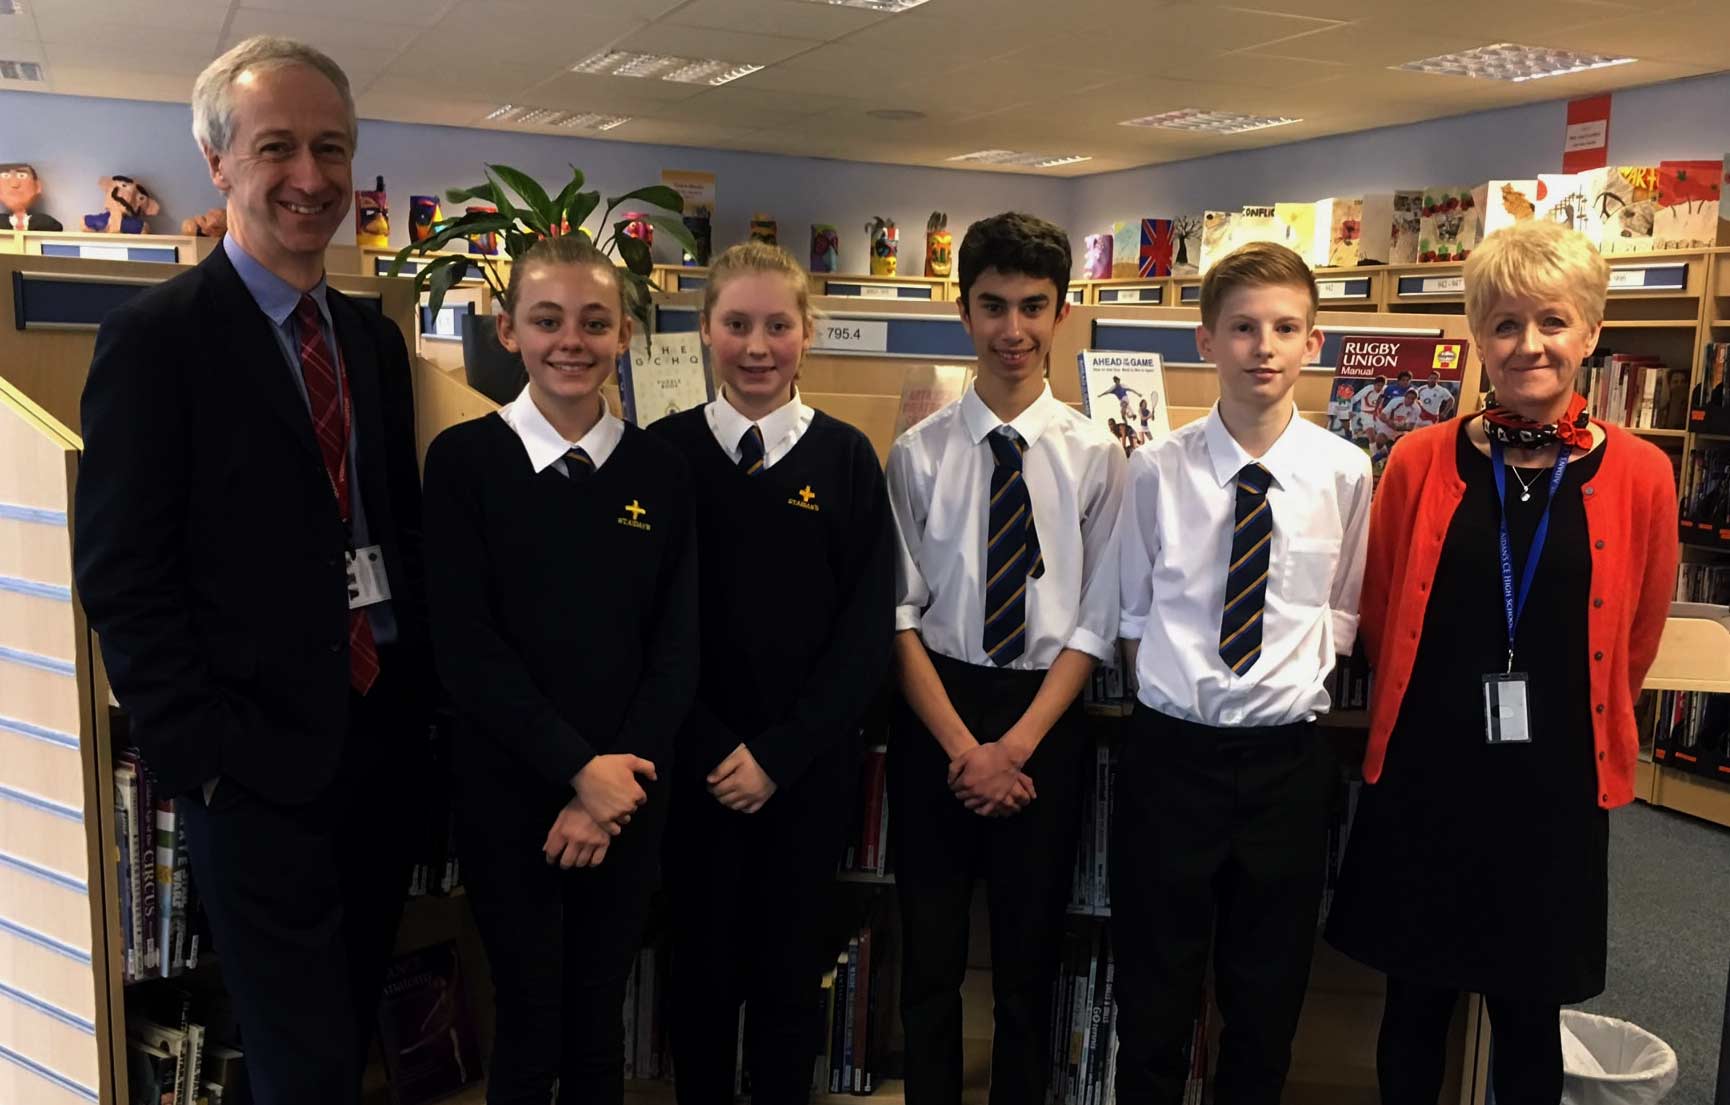 St Aidan’s were delighted to have a very welcome visit from British Library CEO, Roly Keating last week